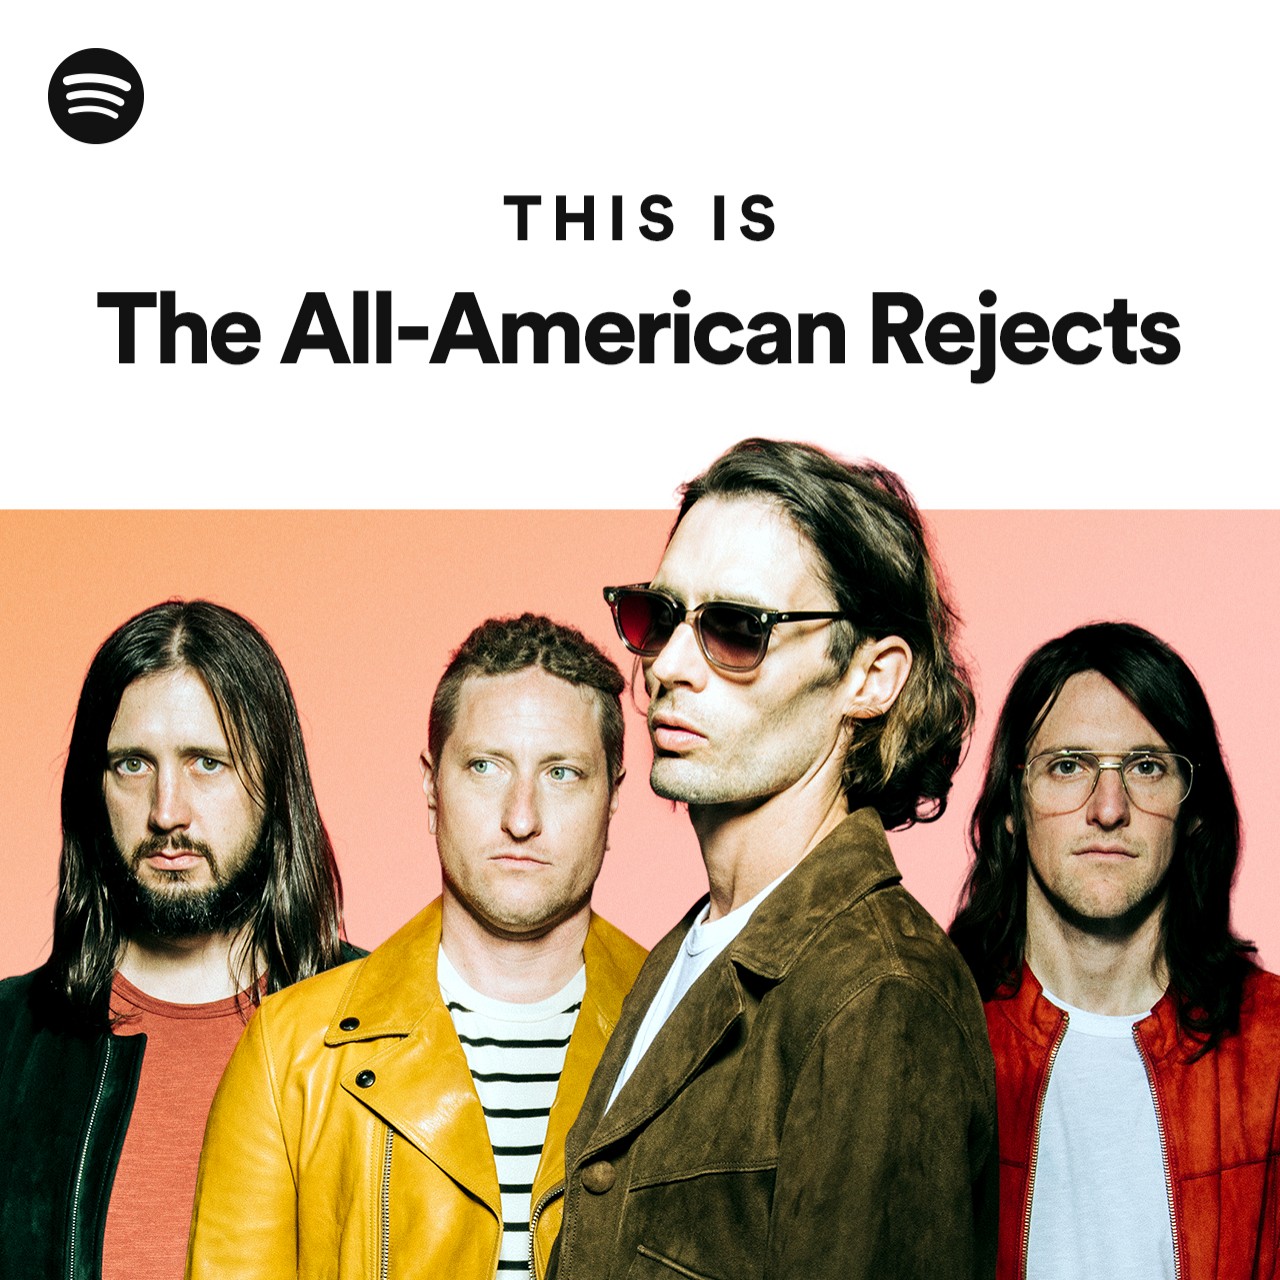 This Is The All-American Rejects